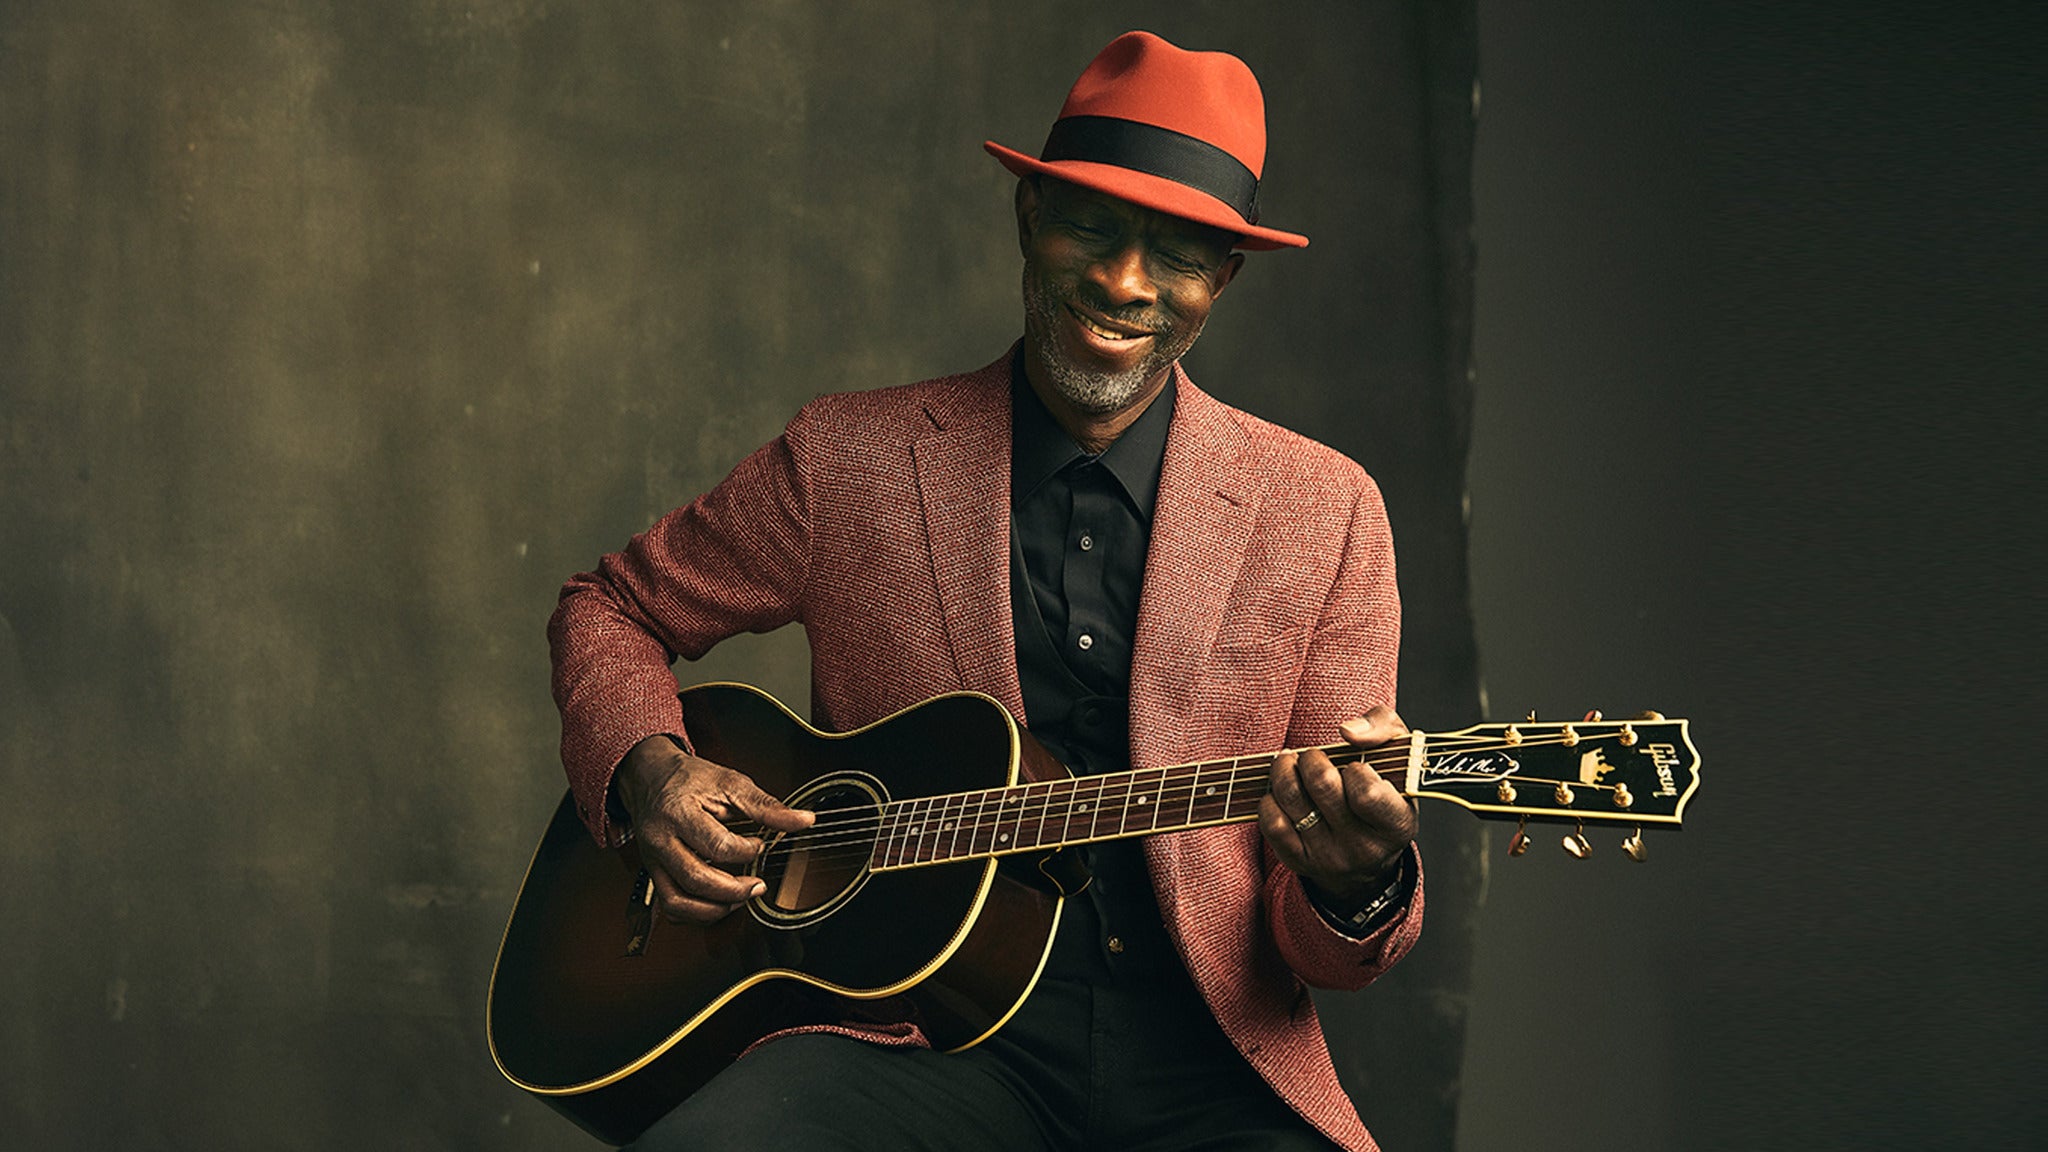 presale code for Keb' Mo' affordable tickets in Chattanooga